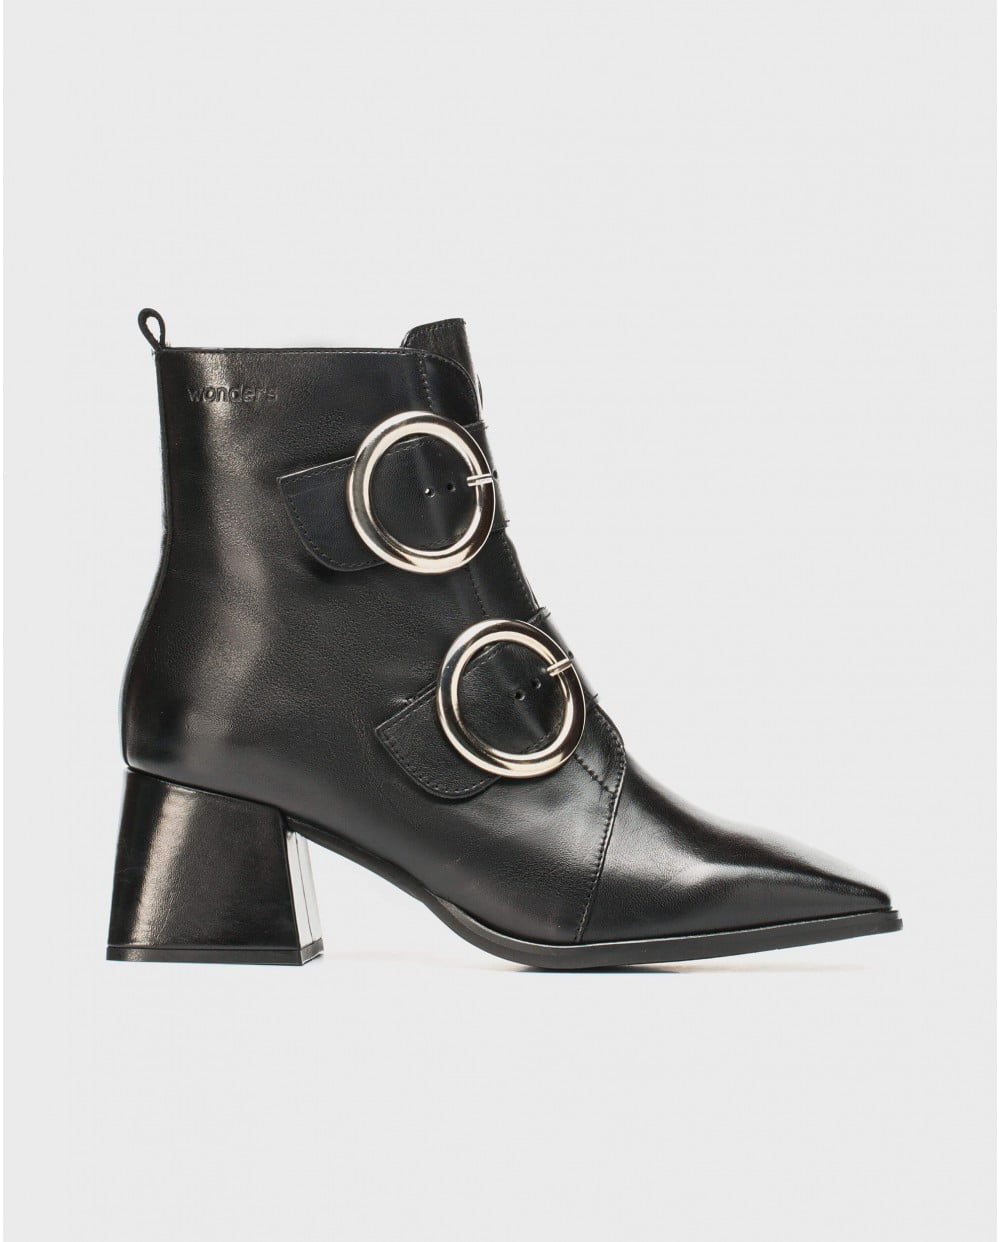 Wonders Double Buckle Leather Ankle Boot